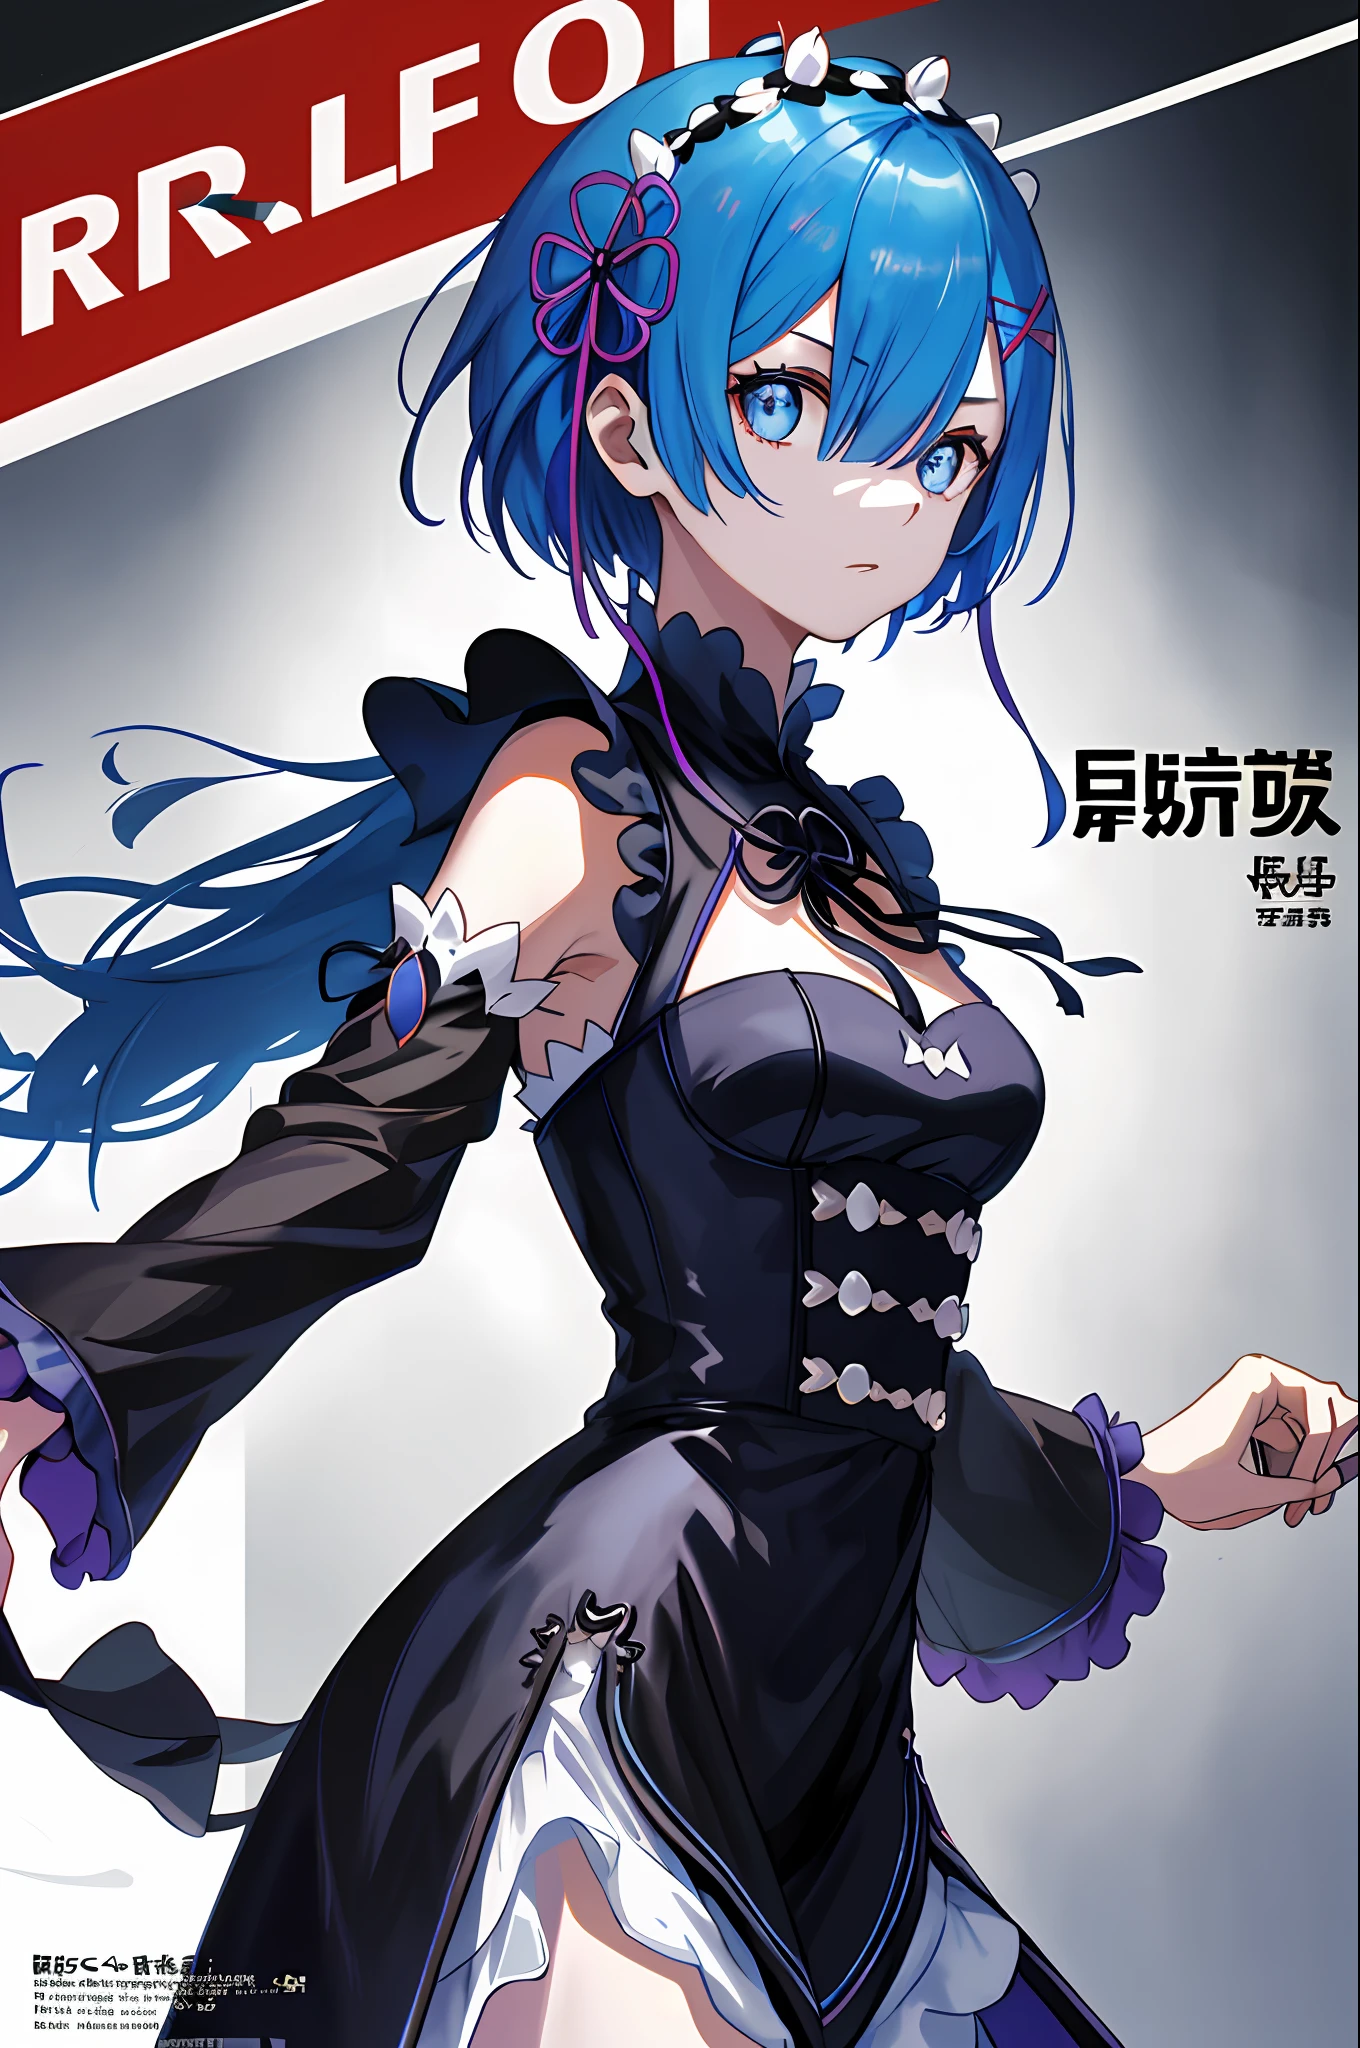 "Blue hair，rem（Re：Zero），[ssmile]，Be red in the face，Castle view，tmasterpiece，best images quality，best illuminate，A single girl in a dress，moderately sized breasts，shyexpression(((dramatic))), (((gritty))), (((intense))) The movie poster features a young woman as the central character。She stands confidently in the center of the poster，Dress in fashion-forward clothing，with a determined expression on her face。The background is dark and gritty，There is a sense of danger and a strong feeling。The text is bold and eye-catching，With catchy slogans，Adds to the overall drama and excitement。The color palette is dominated by dark colors，Dotted with bright colorake the poster dynamic and visually striking，tachi-e (magazine:1.3), (cover-style:1.3), fashionable, woman, vibrant, outfit, posing, front,rich colourful，dyna，Background with，element in，self-assured，Expressing the，halter，statement，attachment，A majestic，coil，Runt，Touching pubic area，Scenes，text，Cover of a，boldness，attention-grabbing，titles，Fashionab，typeface，Catchy，titleore big，smart、moderno、Trendy、focus-on、Fashionab